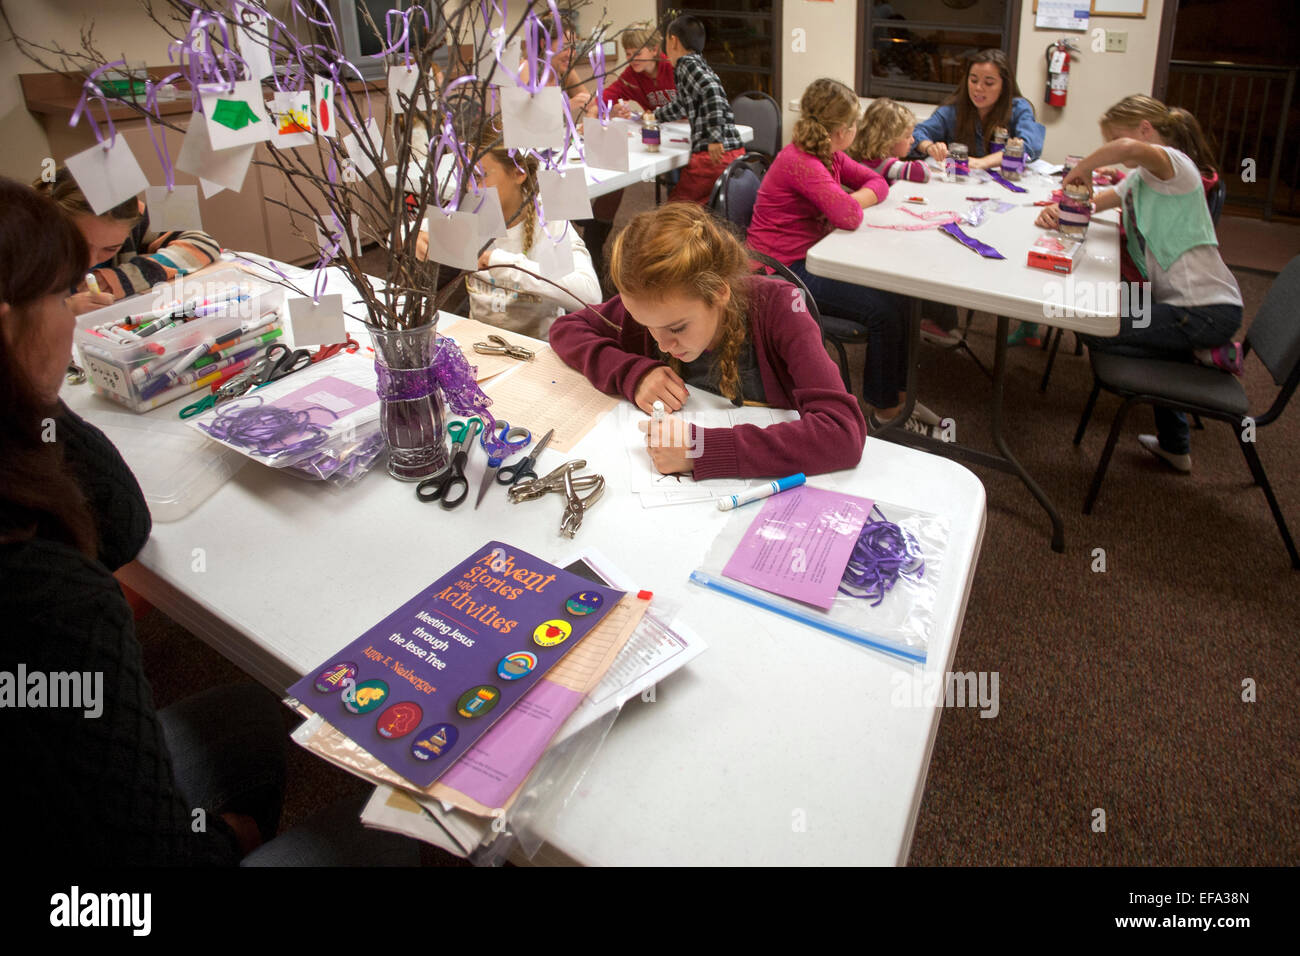 Children at St. Timothy's Catholic Church, Laguna Niguel, CA, make a Jesse tree which symbolizes the time of preparation for the celebration of the Nativity of Jesus at Christmas. Note art supplies on table and instruction book. Stock Photo